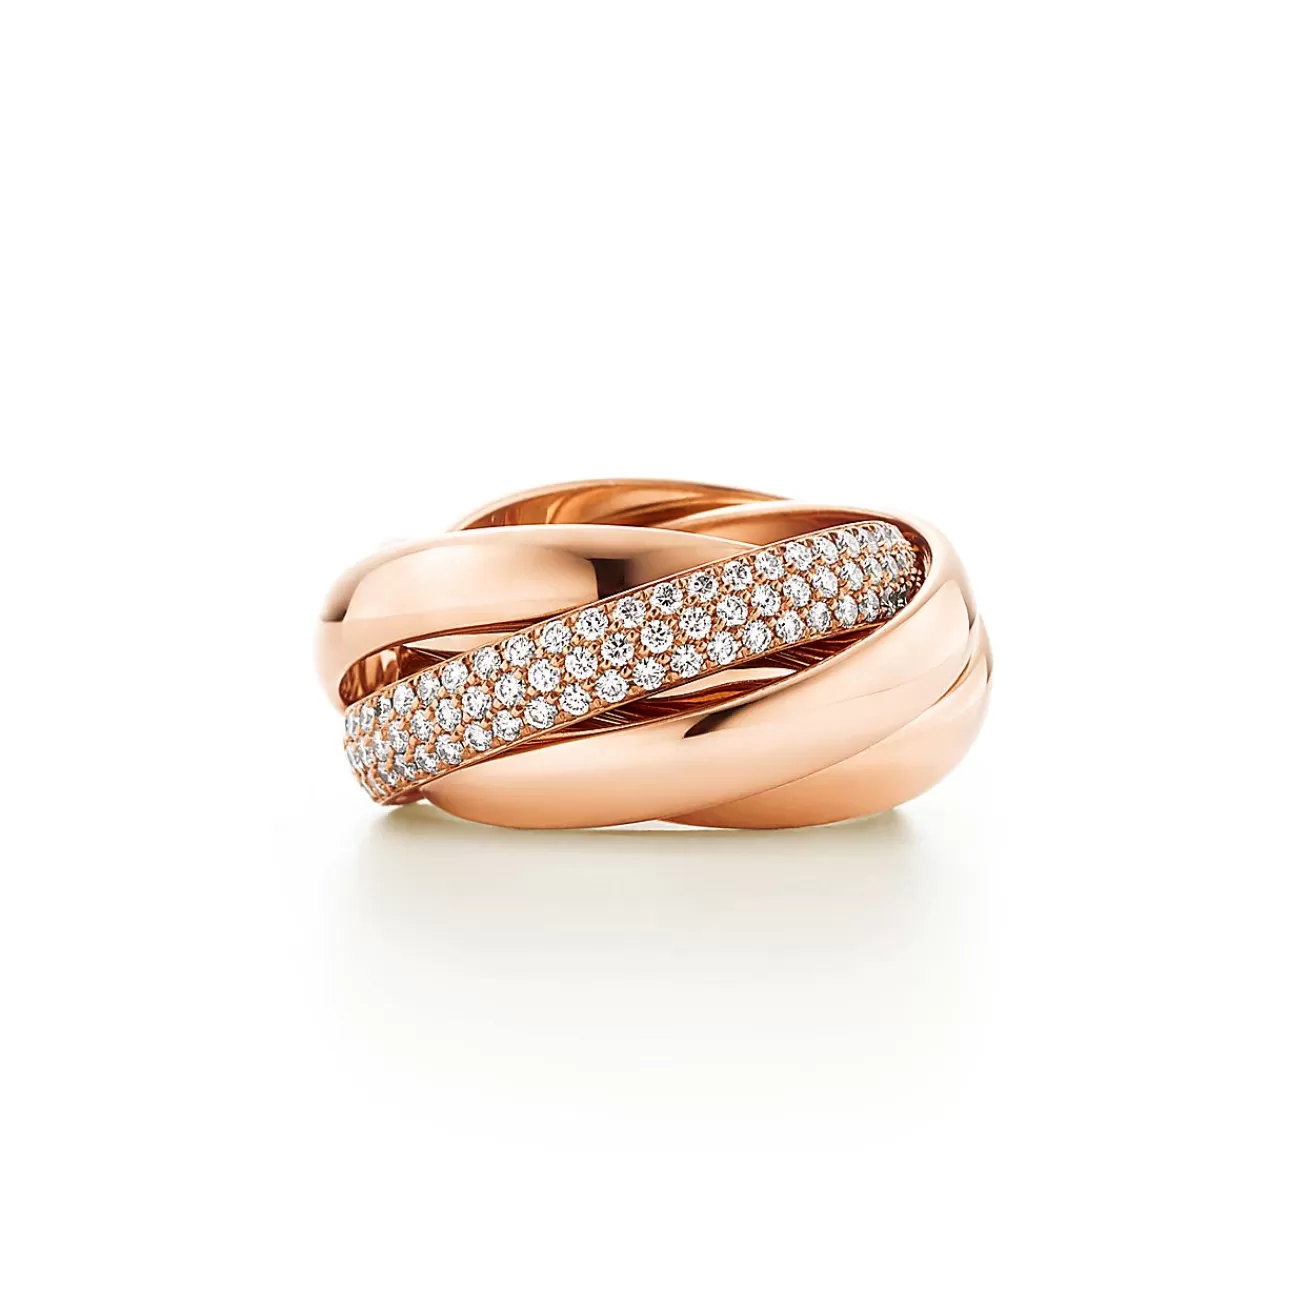 Tiffany & Co. Paloma's Melody five-band ring in 18k rose gold with diamonds. | ^ Rings | Rose Gold Jewelry